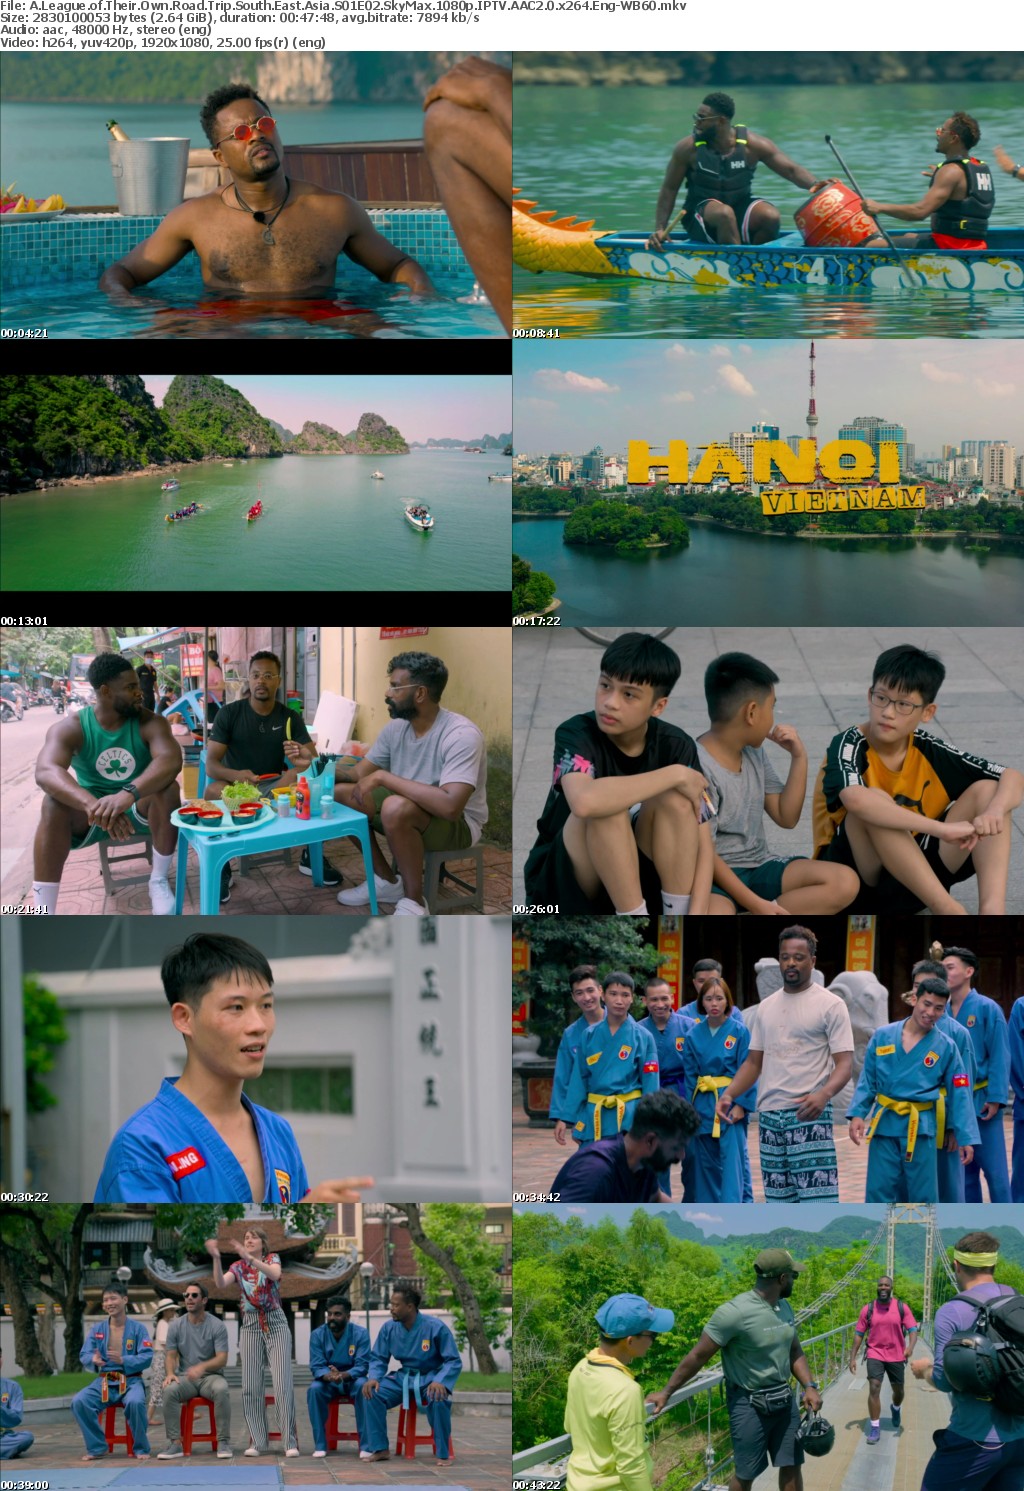 A League of Their Own Road Trip South East Asia S01E02 SkyMax 1080p IPTV AAC2 0 x264 Eng-WB60